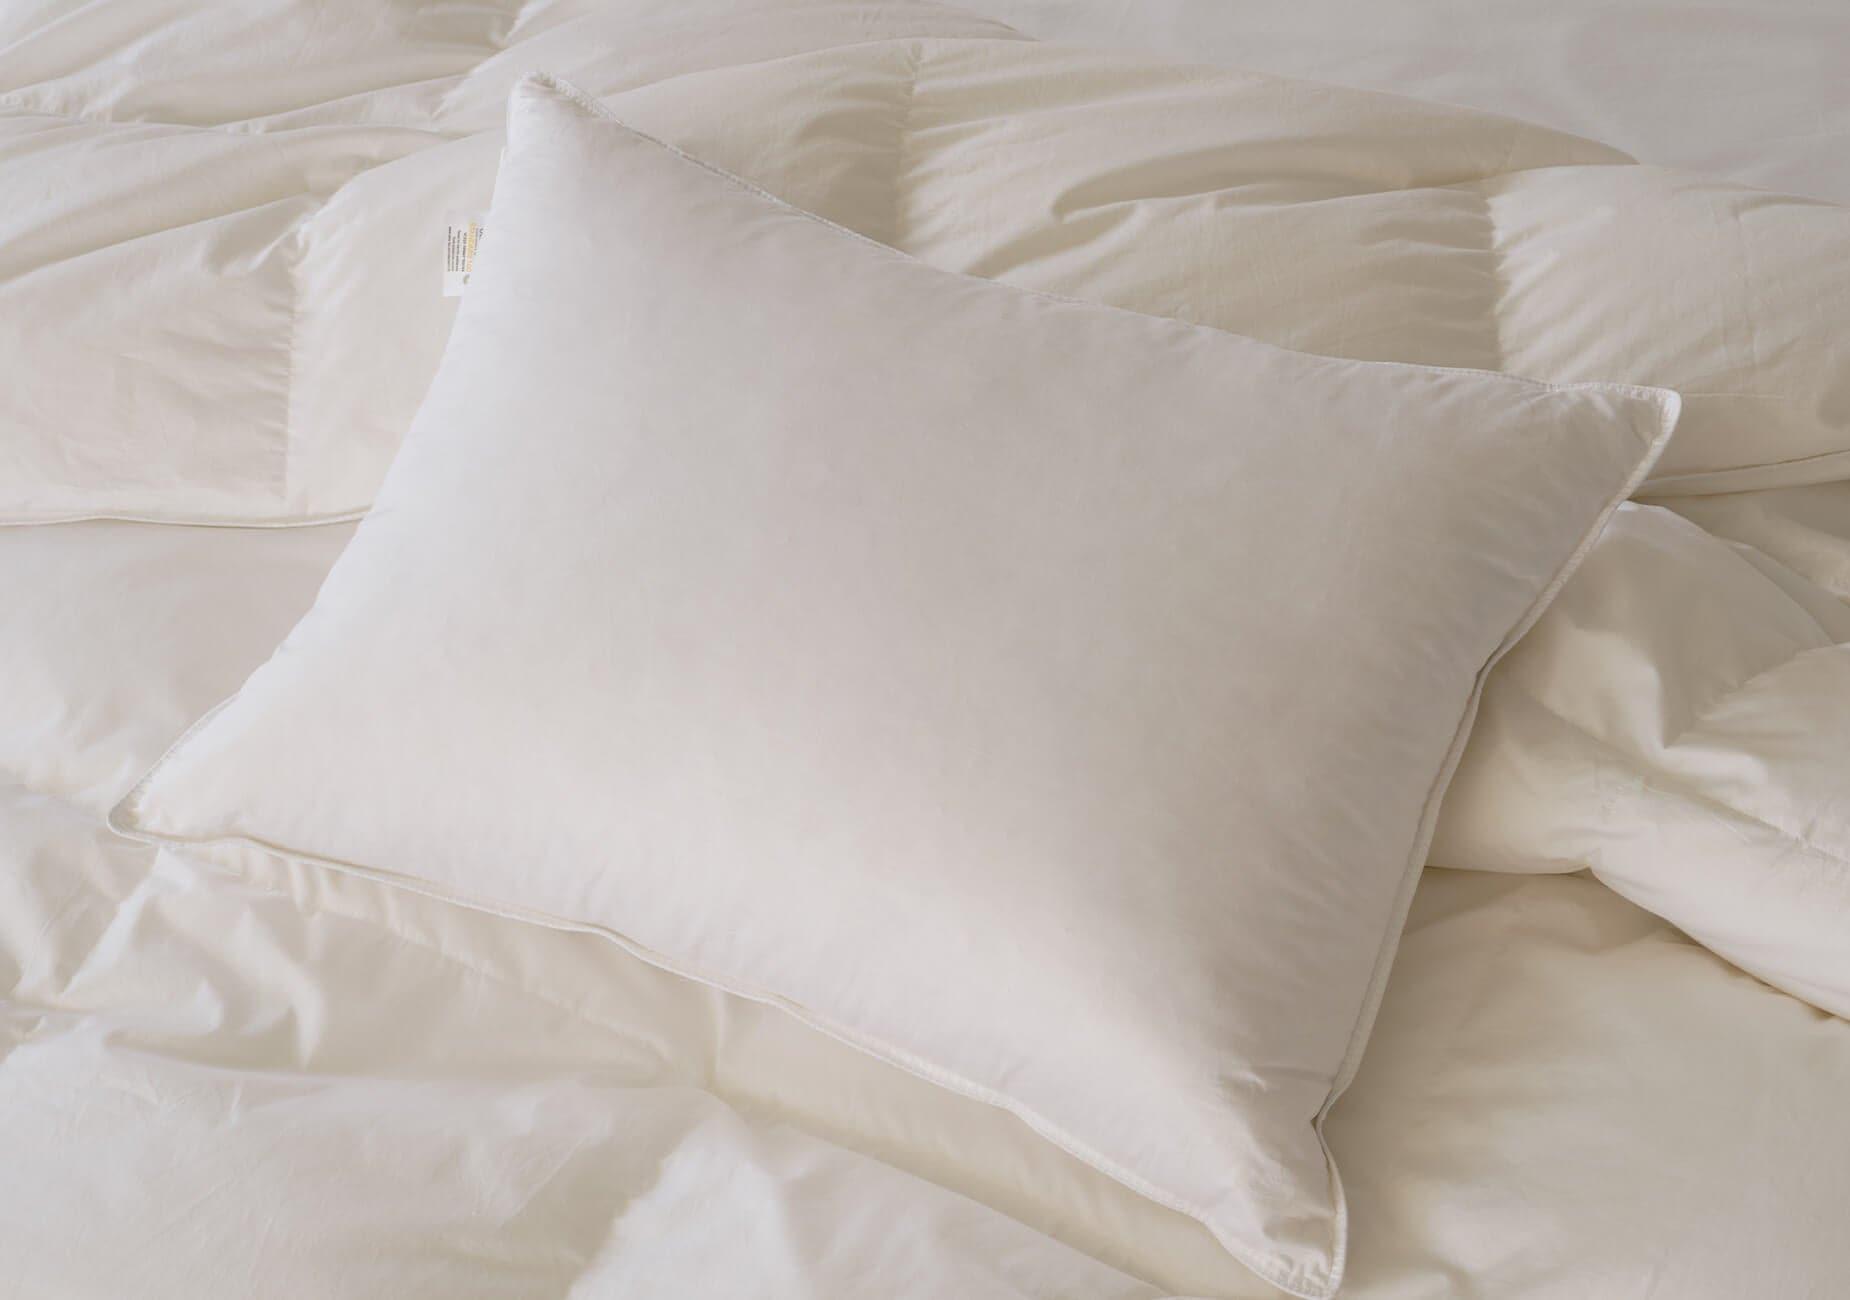 The white down pillow is a timeless and classic choice for a luxurious bedding experience.